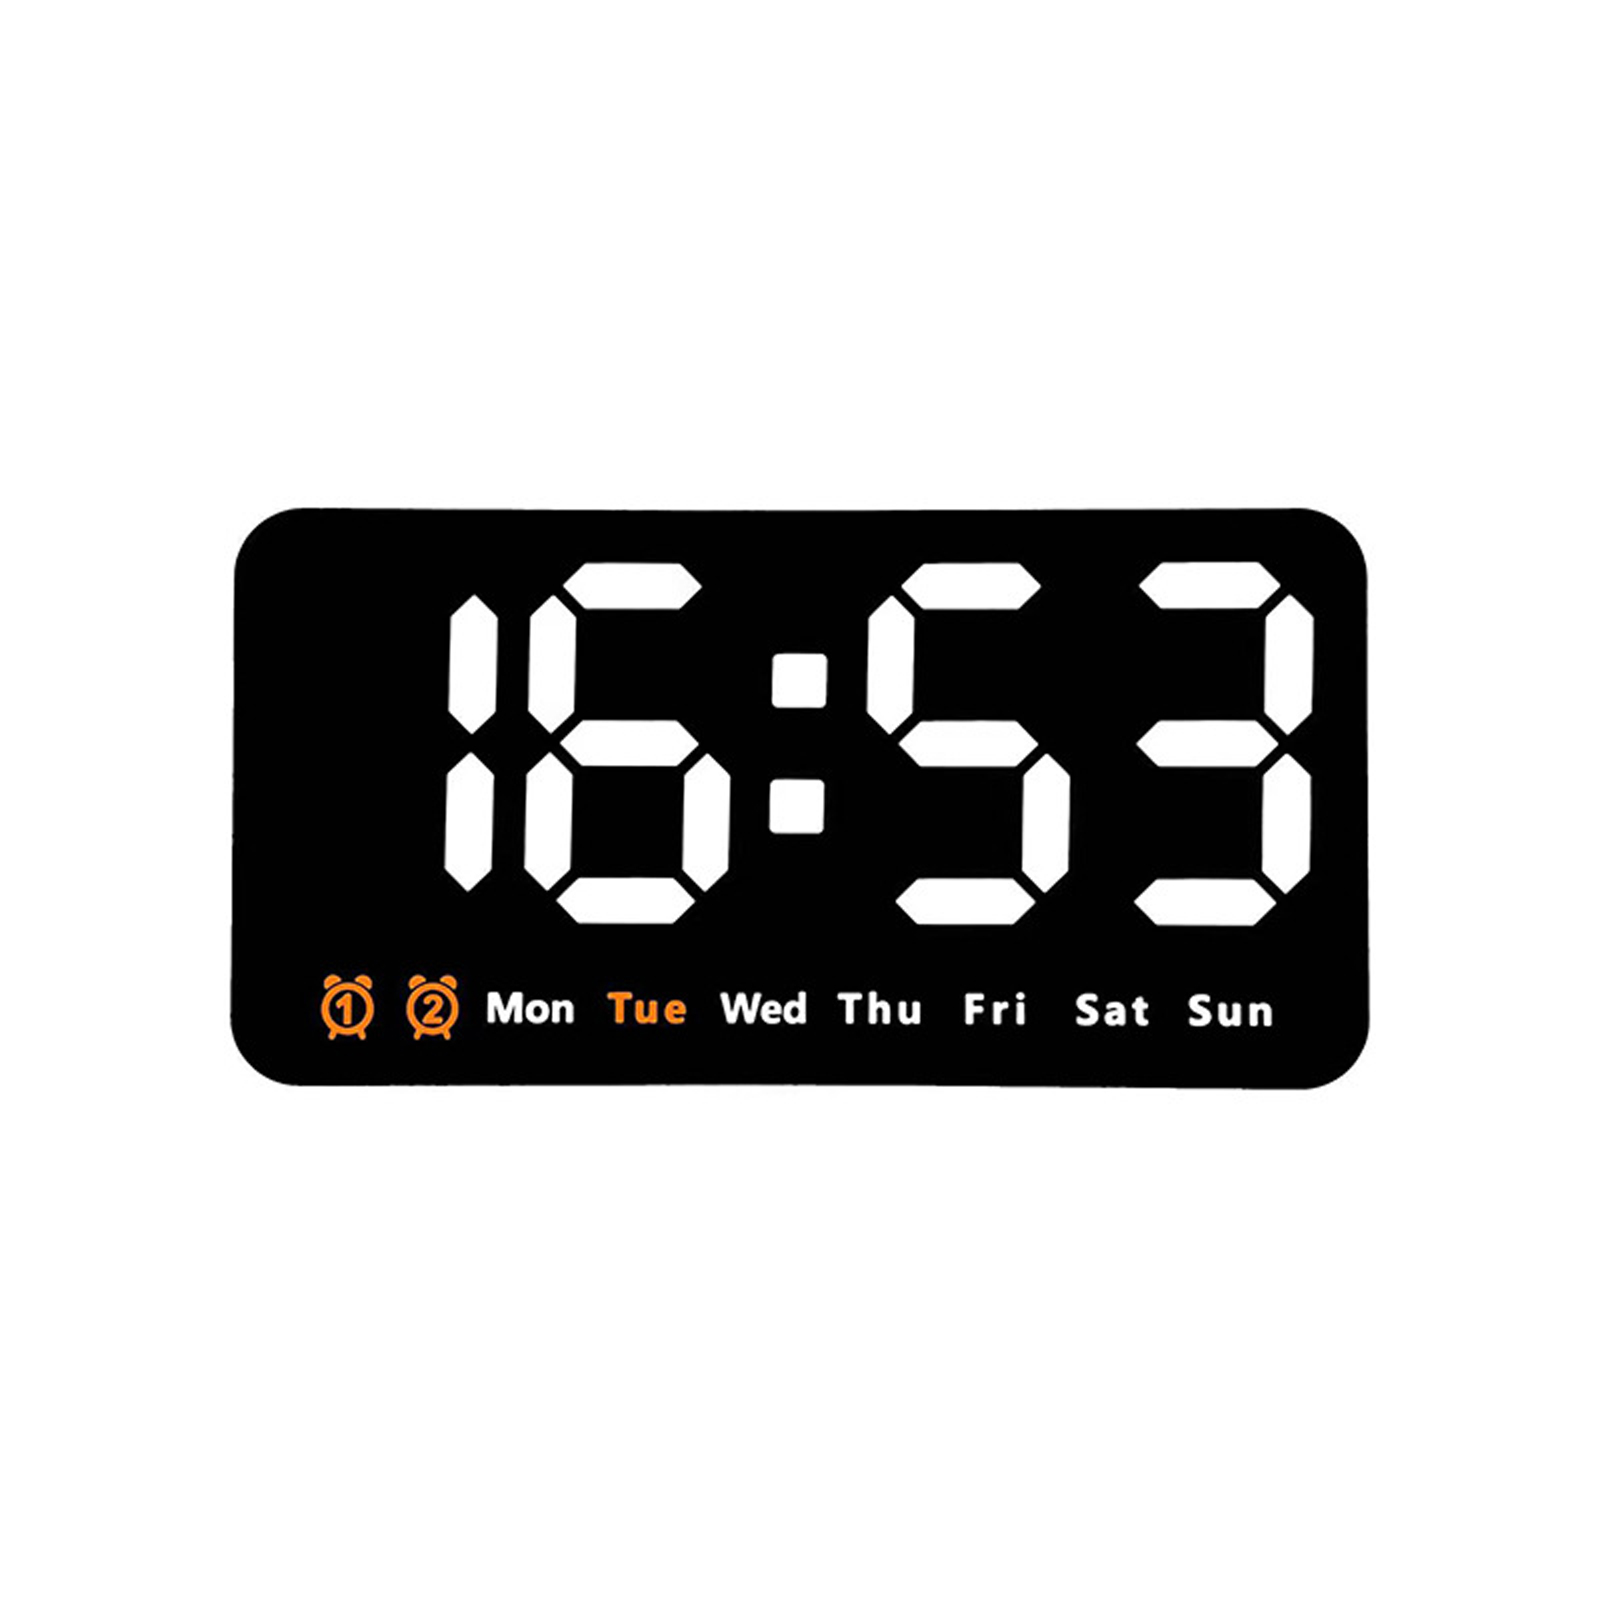 LED Digital Wall Clock With 2 Alarm Large Display Alarm Clock For Living Room Office Classroom Gym Shop Decor